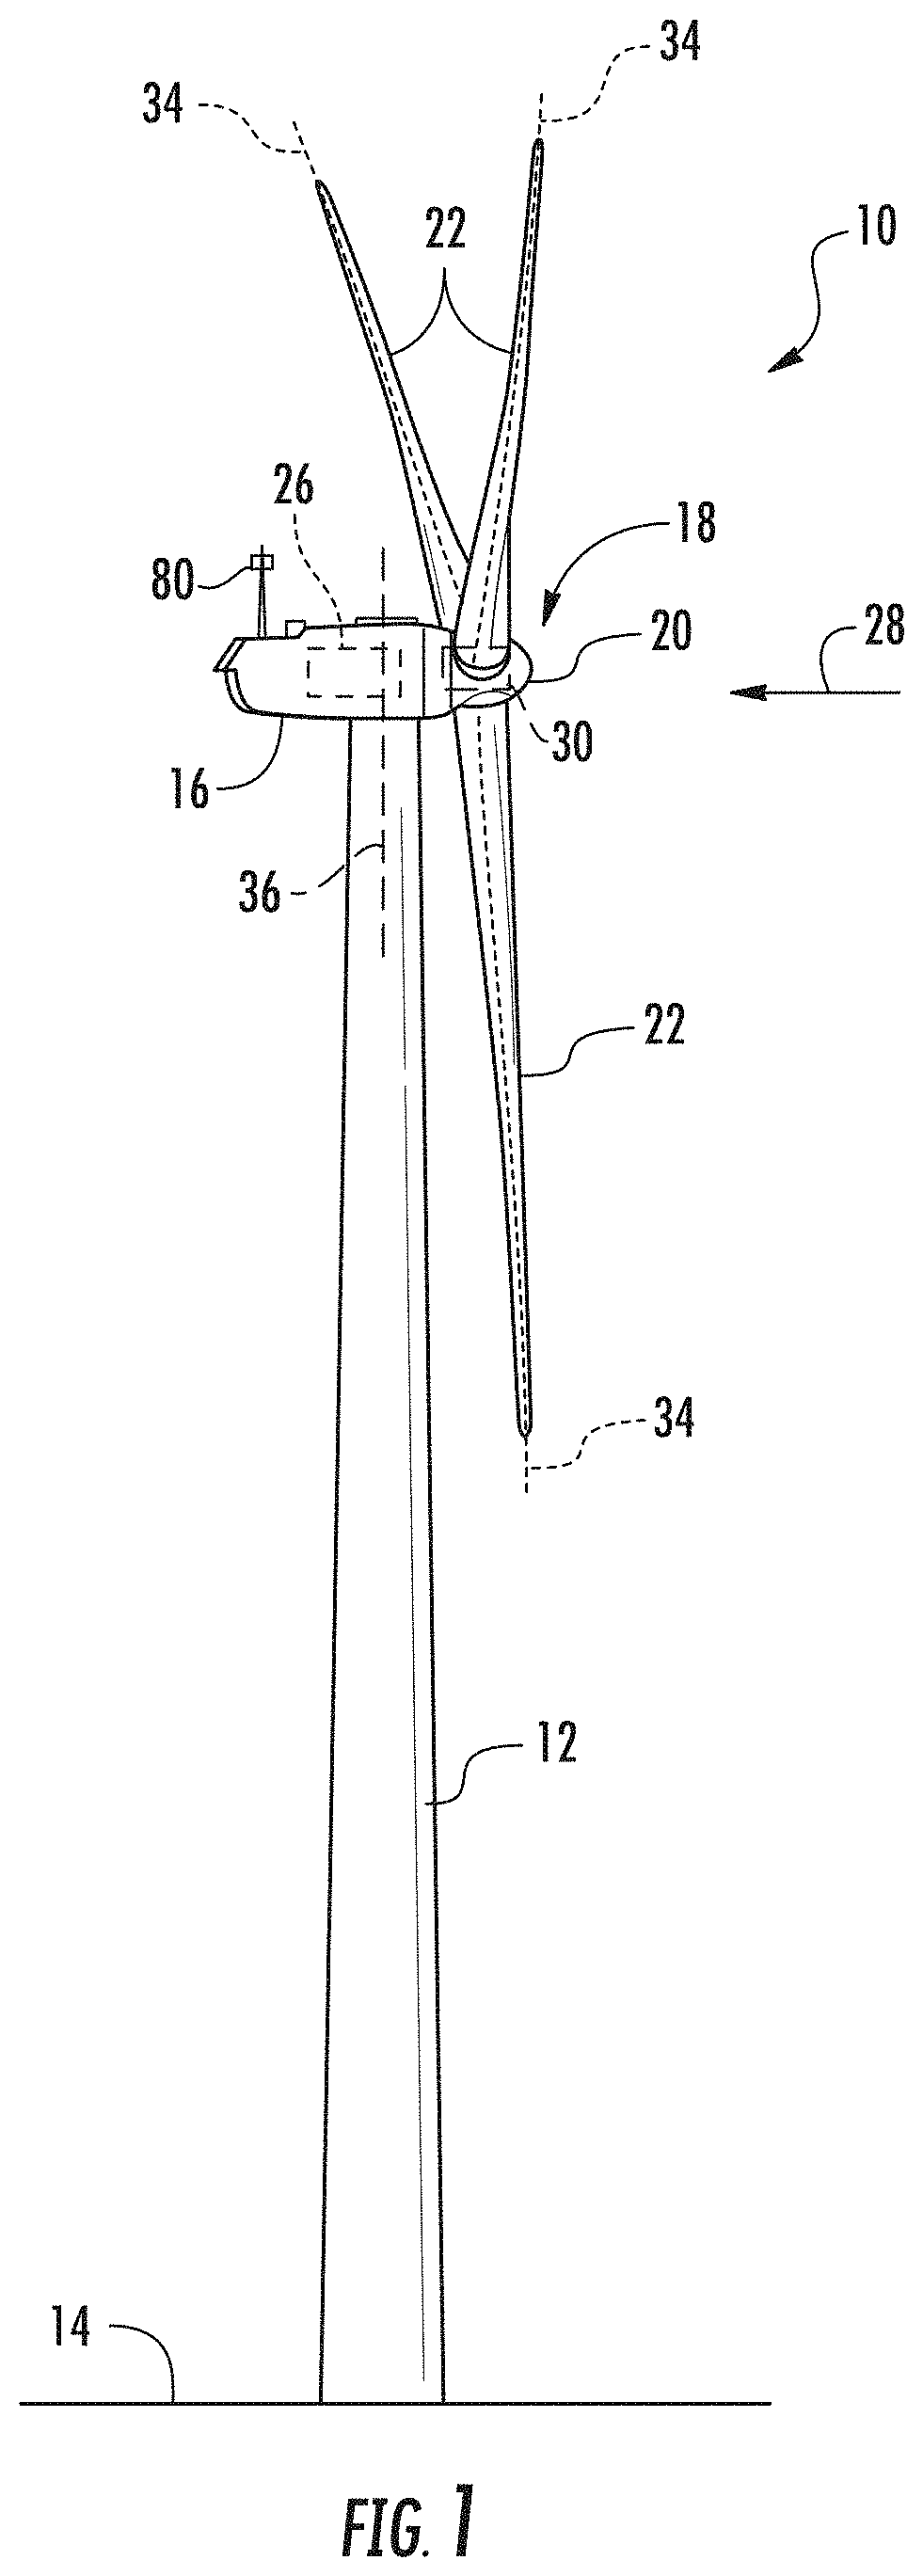 System and method for optimizing power output of a wind turbine during an operational constraint